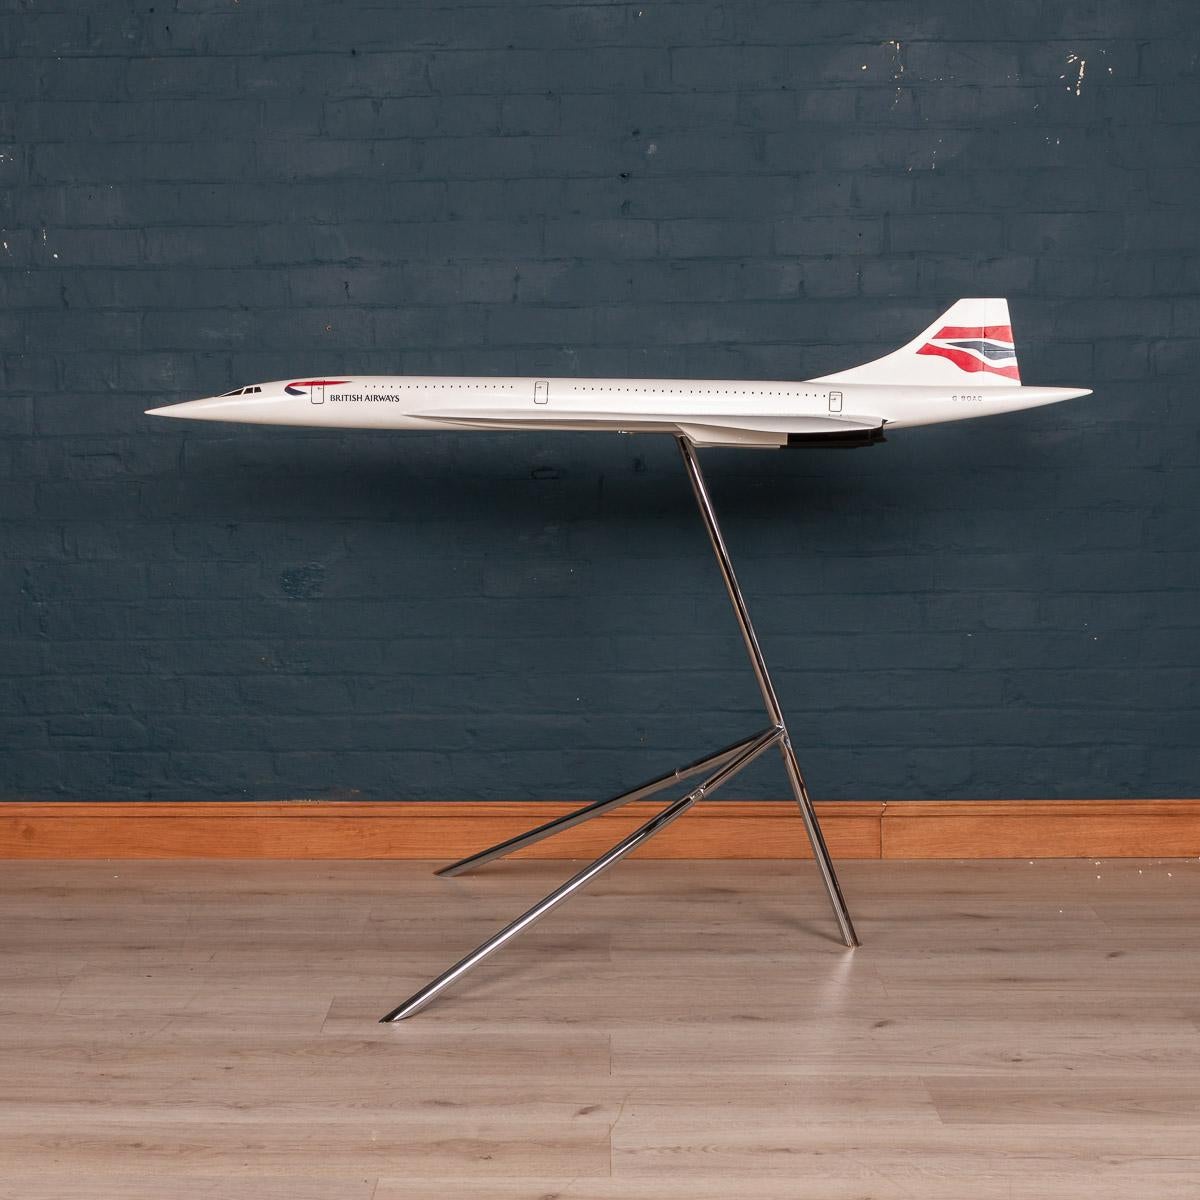 A superb vintage fibreglass and plastic composite model of a Concorde in full British Airways livery mounted on original chrome plated stand by Space Models, circa 1980. This 1:36 scale aircraft model was presented to one of BA's top travel agents